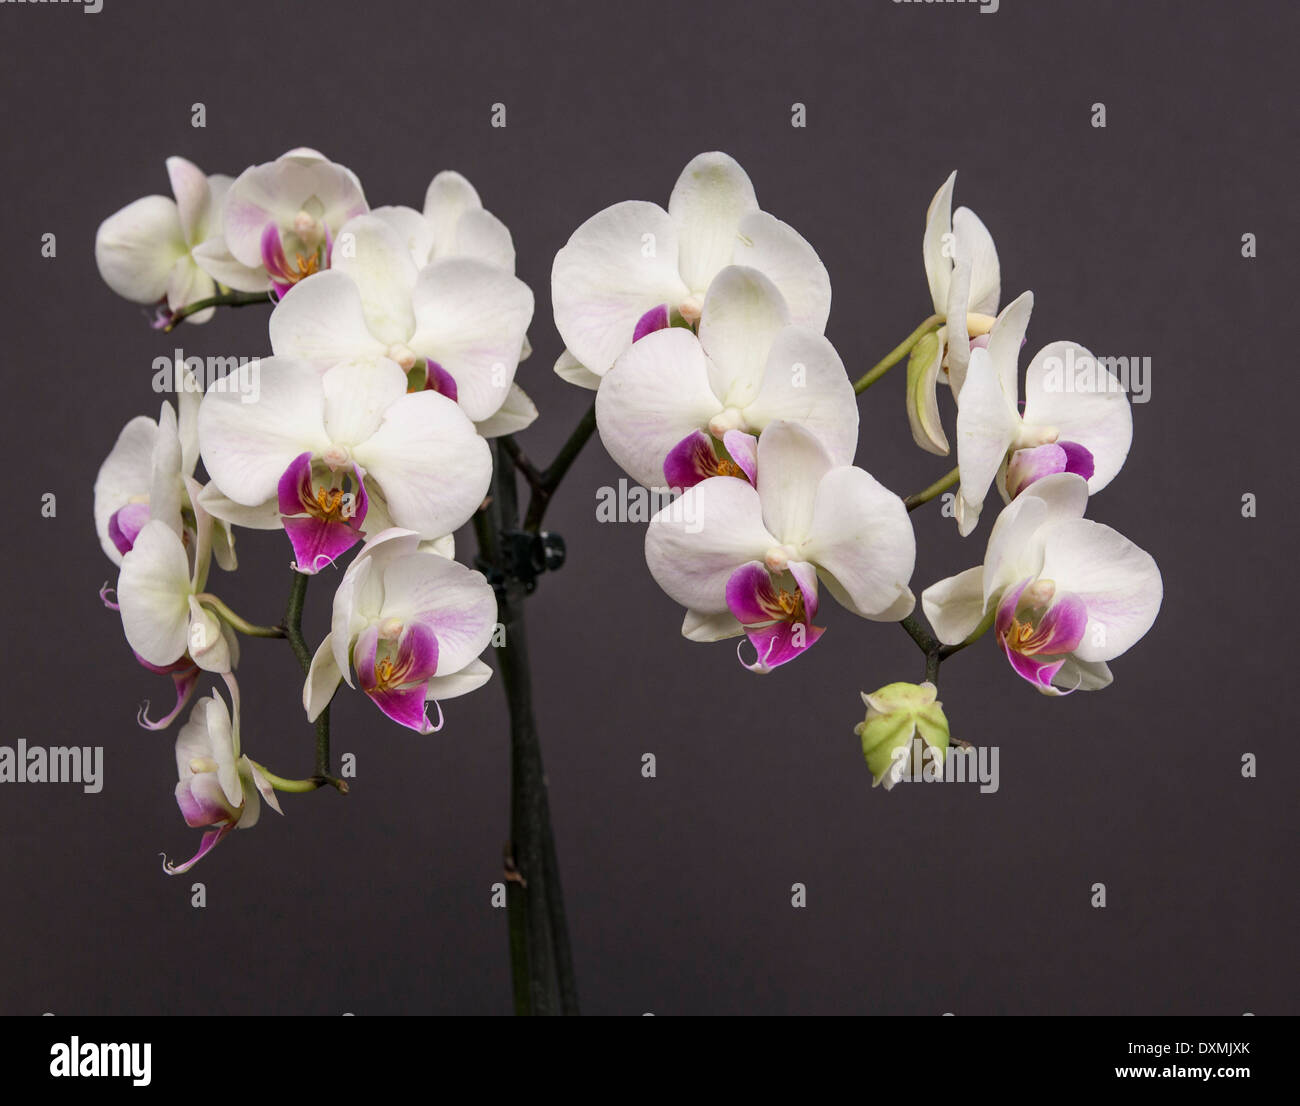 Orchid flowers Stock Photo